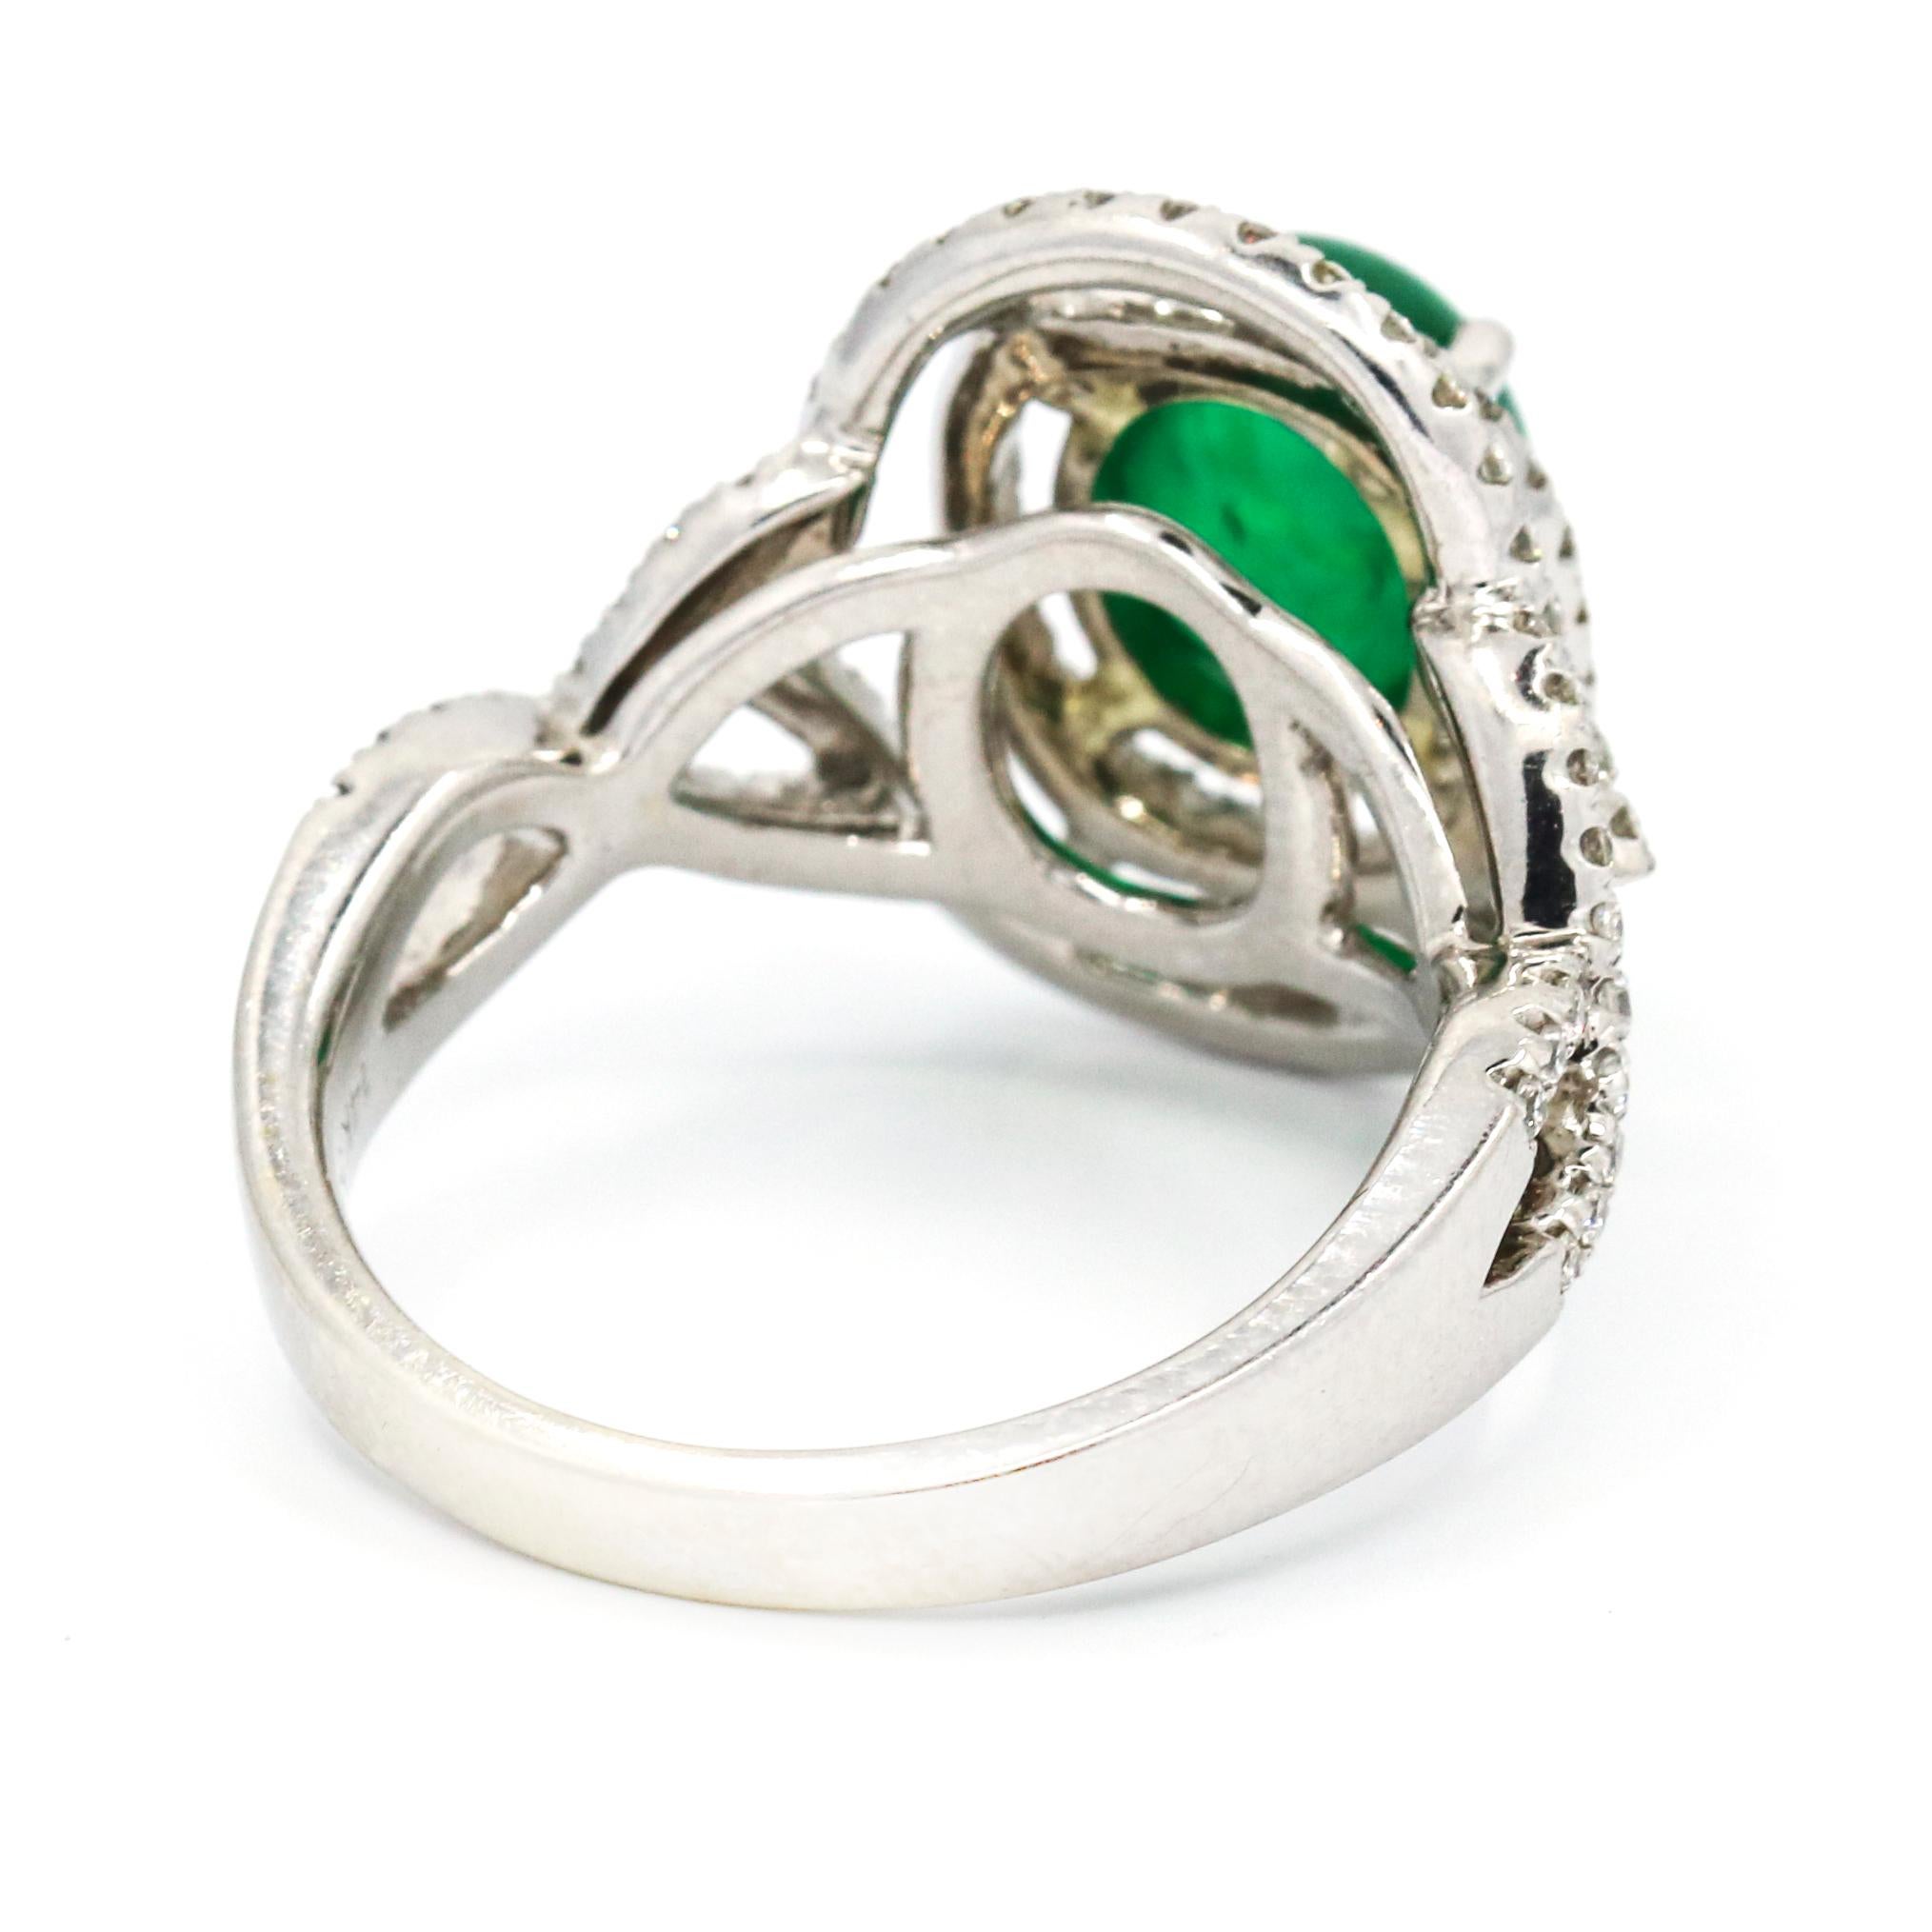 3.53 Carat 14 Karat White Gold Emerald Diamond Cocktail Ring In Excellent Condition For Sale In Fort Lauderdale, FL